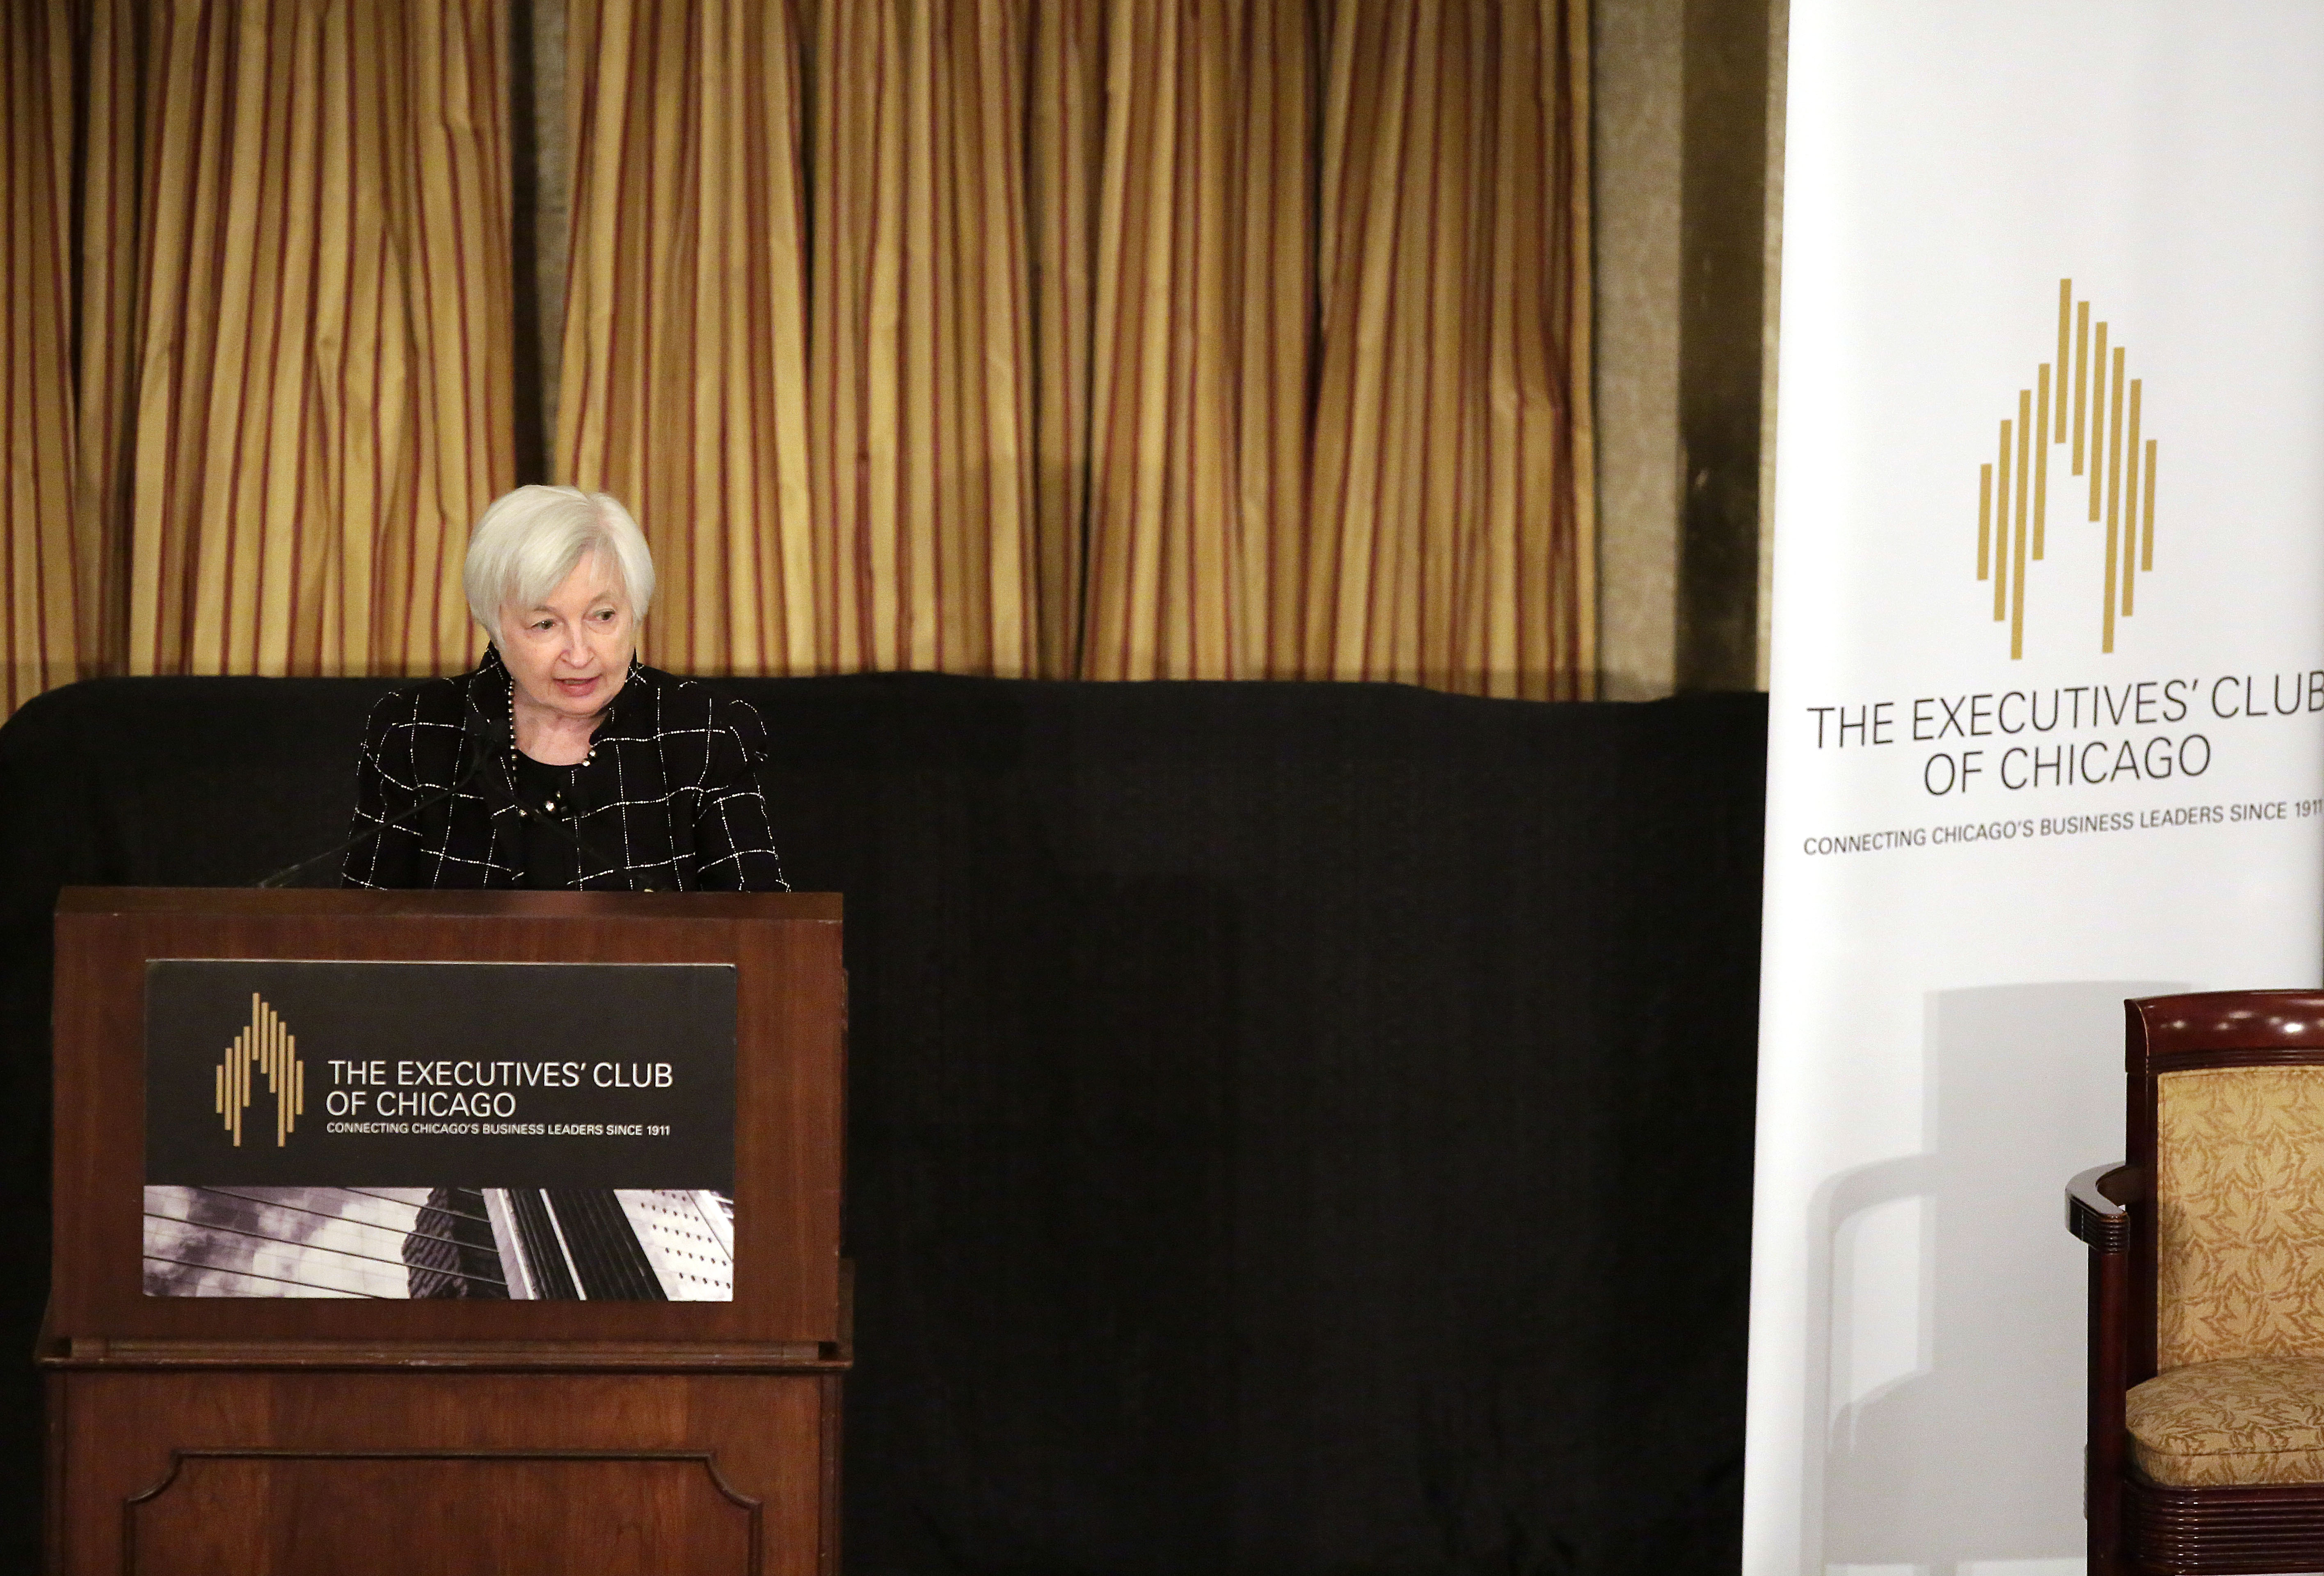 Federal Reserve Chair Janet Yellen Speaks At The Executives Club Of Chicago